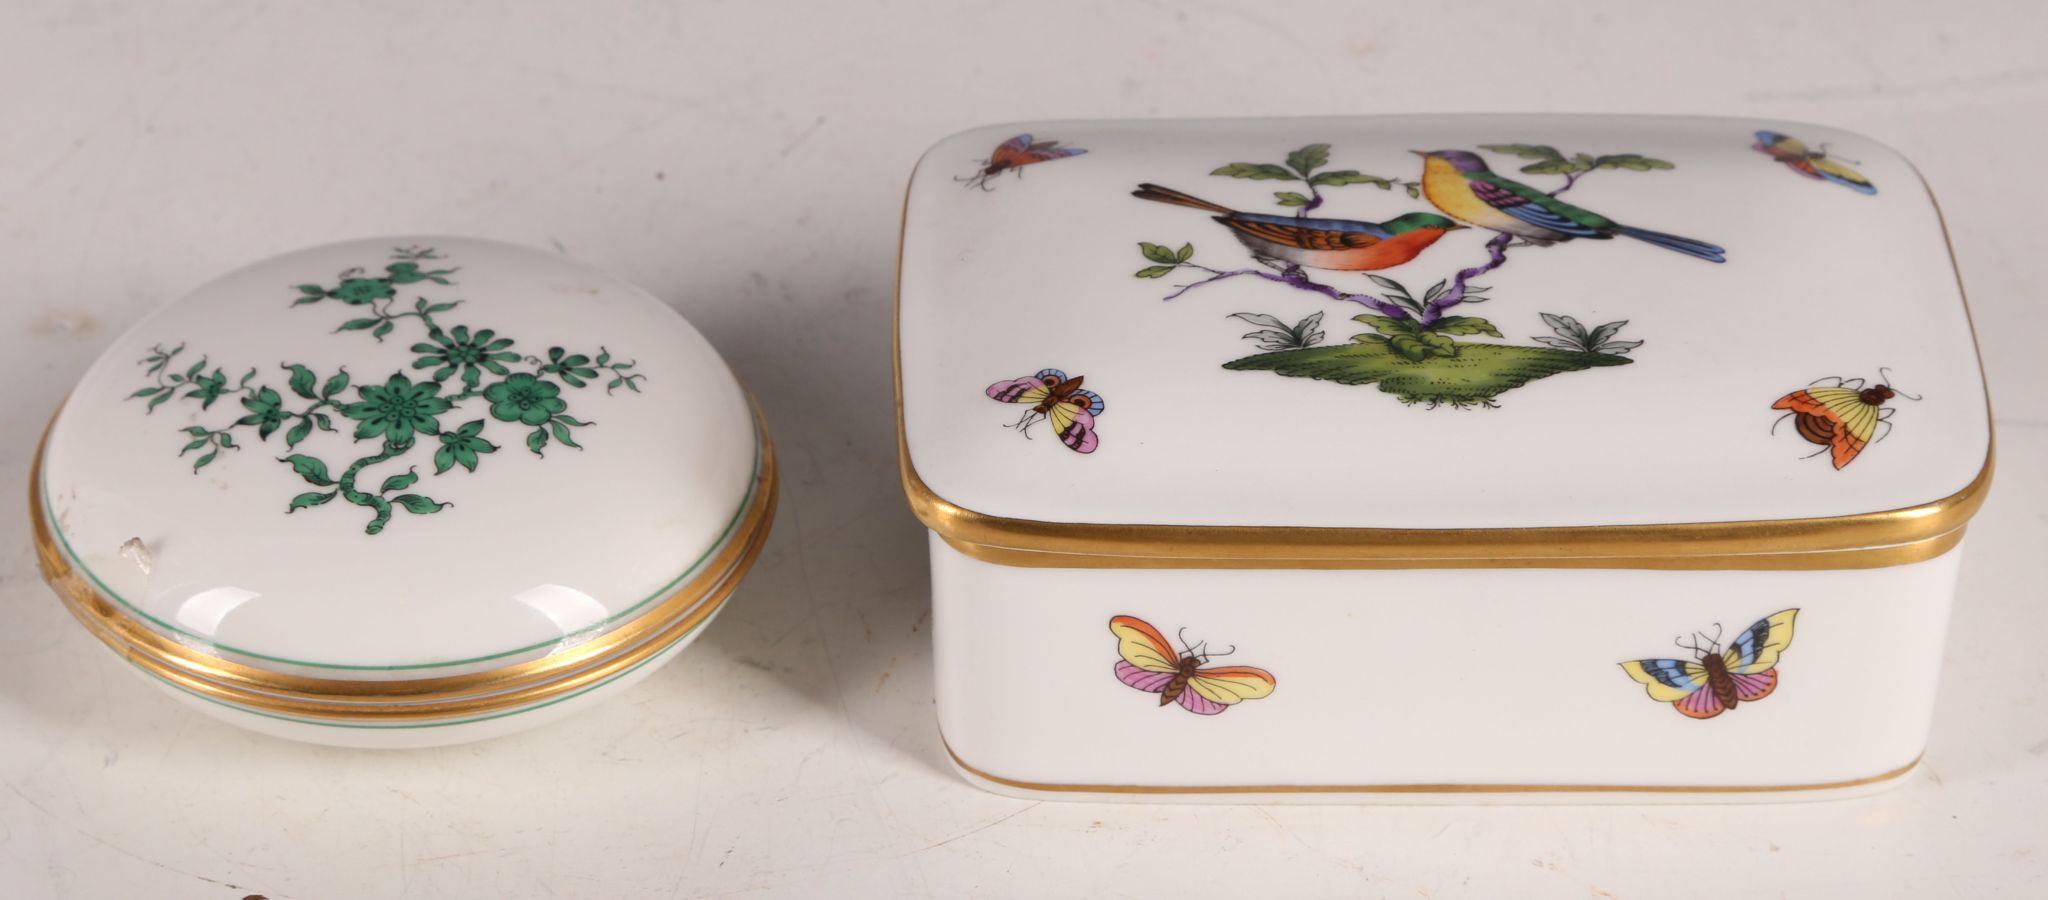 A Herend porcelain rectangular box and cover, hand-painted with birds and butterflies, and a